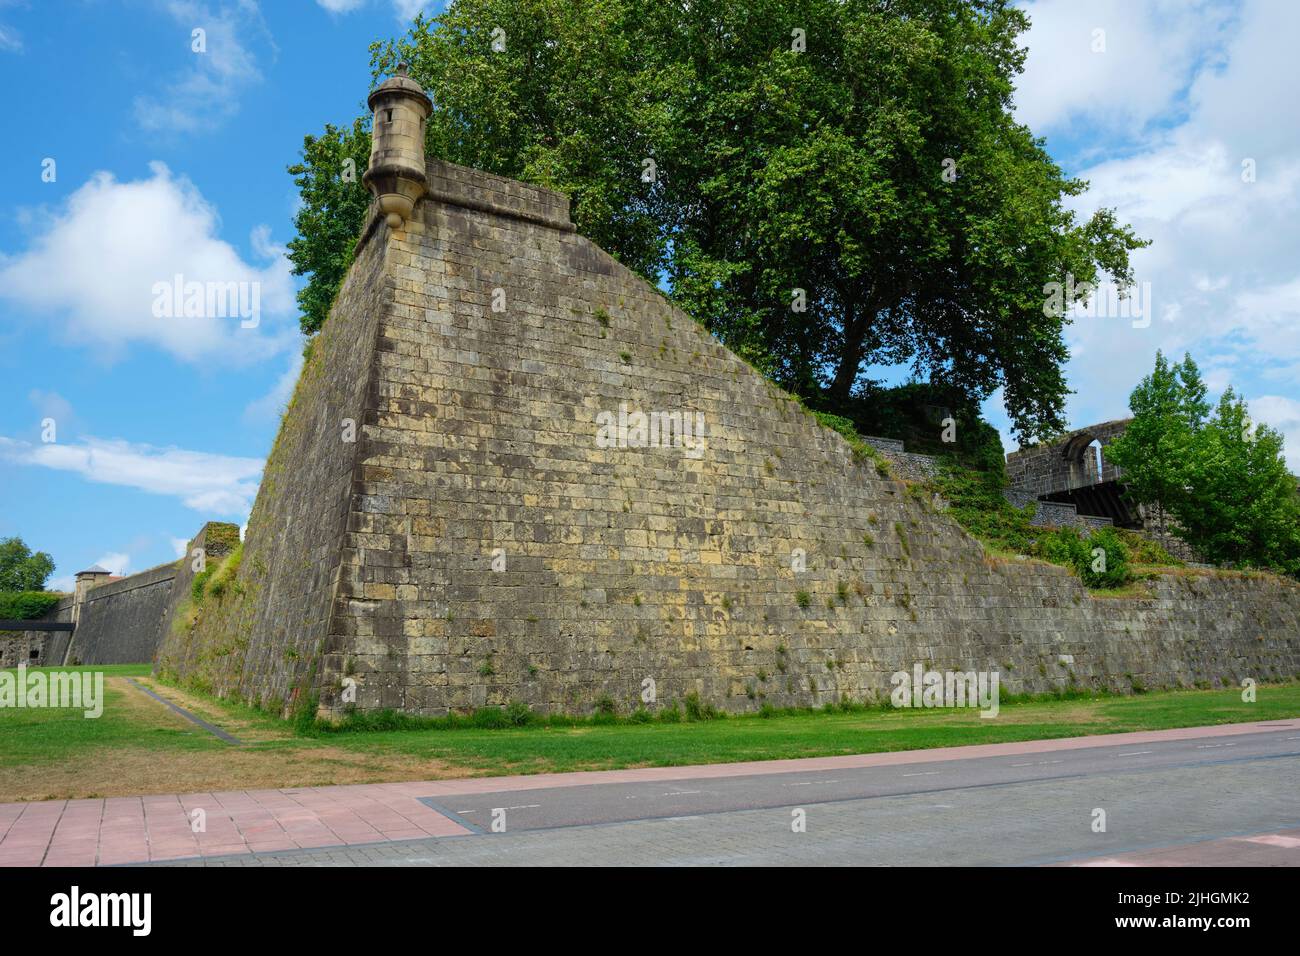 the Baluarte de la Reina bastion in Hondarribia, in the Basque Country, Spain, and a damaged section of the ramparts, that suffered intense attacks in Stock Photo